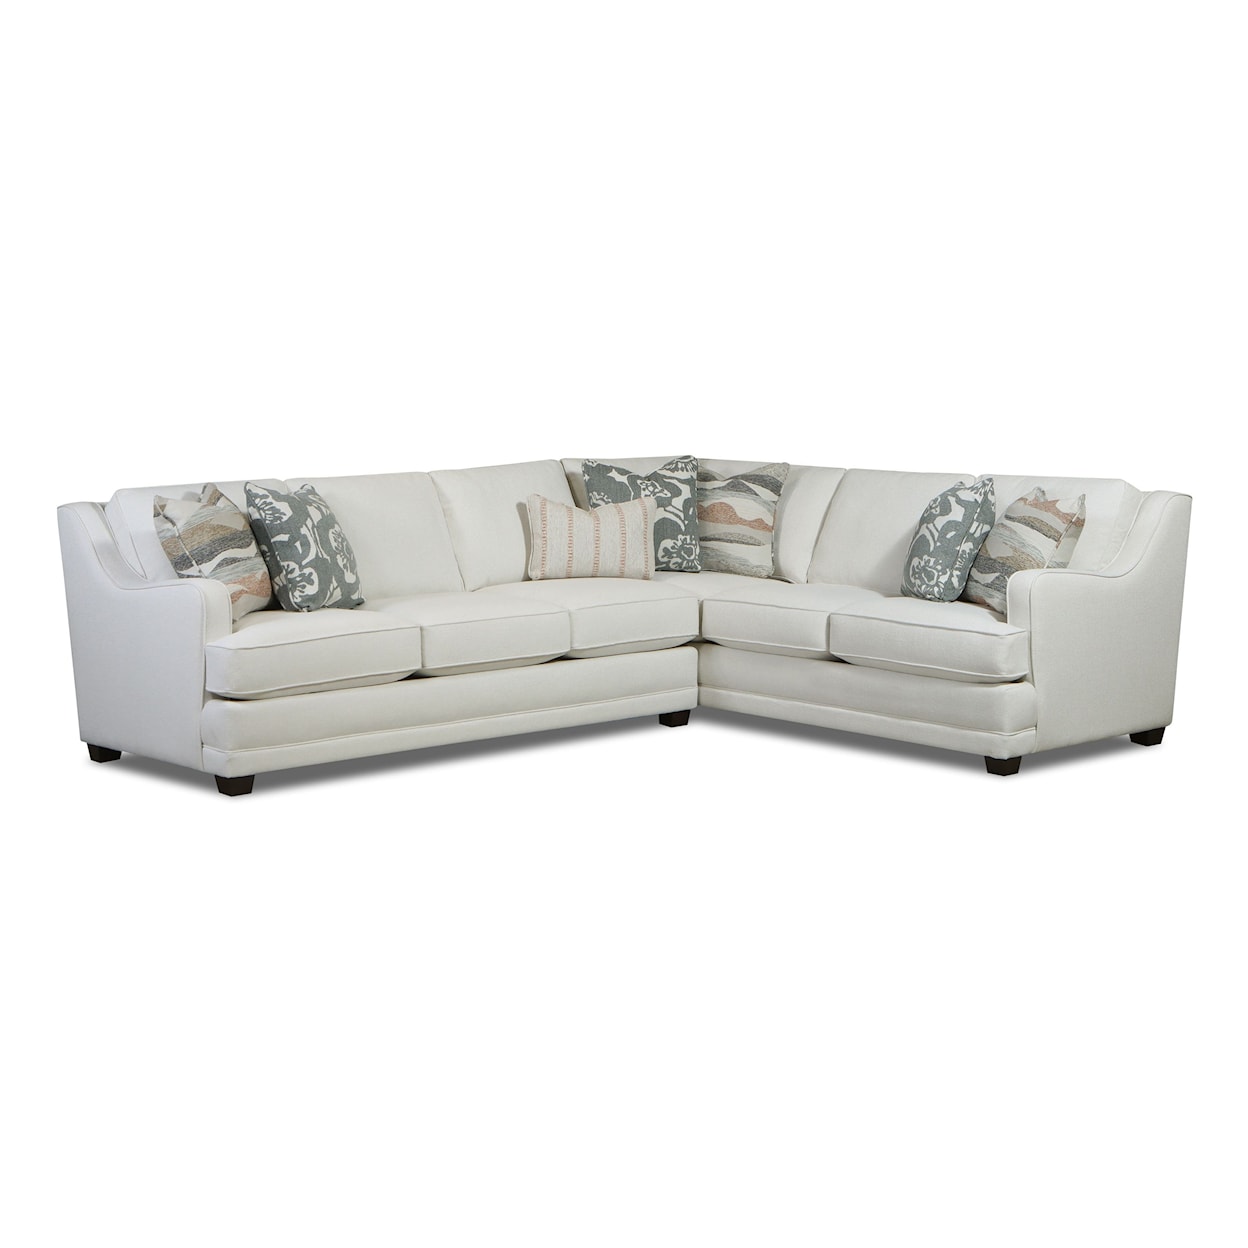 Fusion Furniture 7000 MISSIONARY SALT 2-Piece Sectional